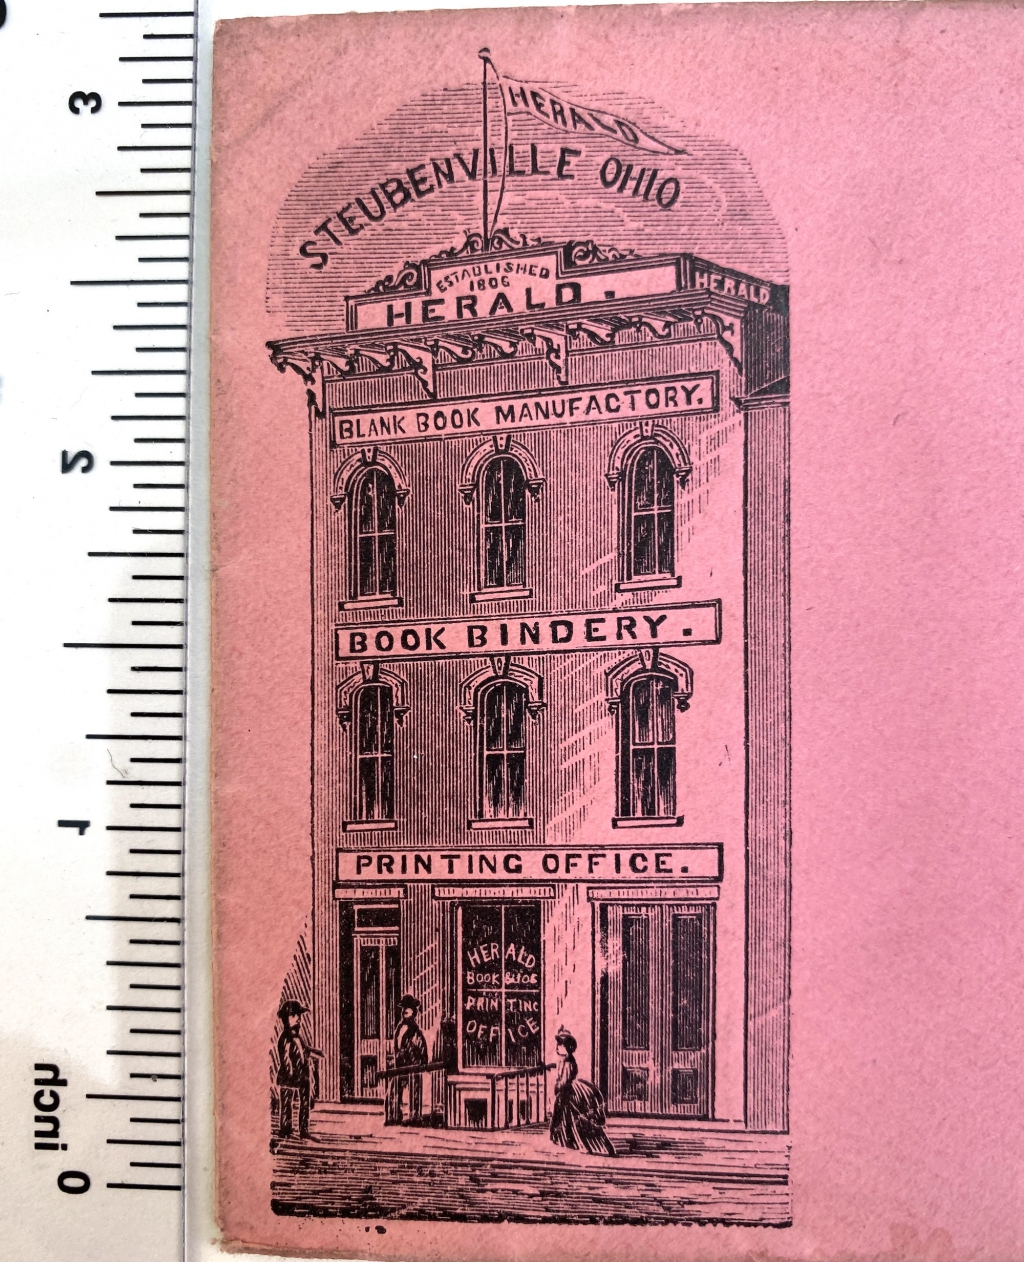 Enlargement of image on the pink envelope to show detail